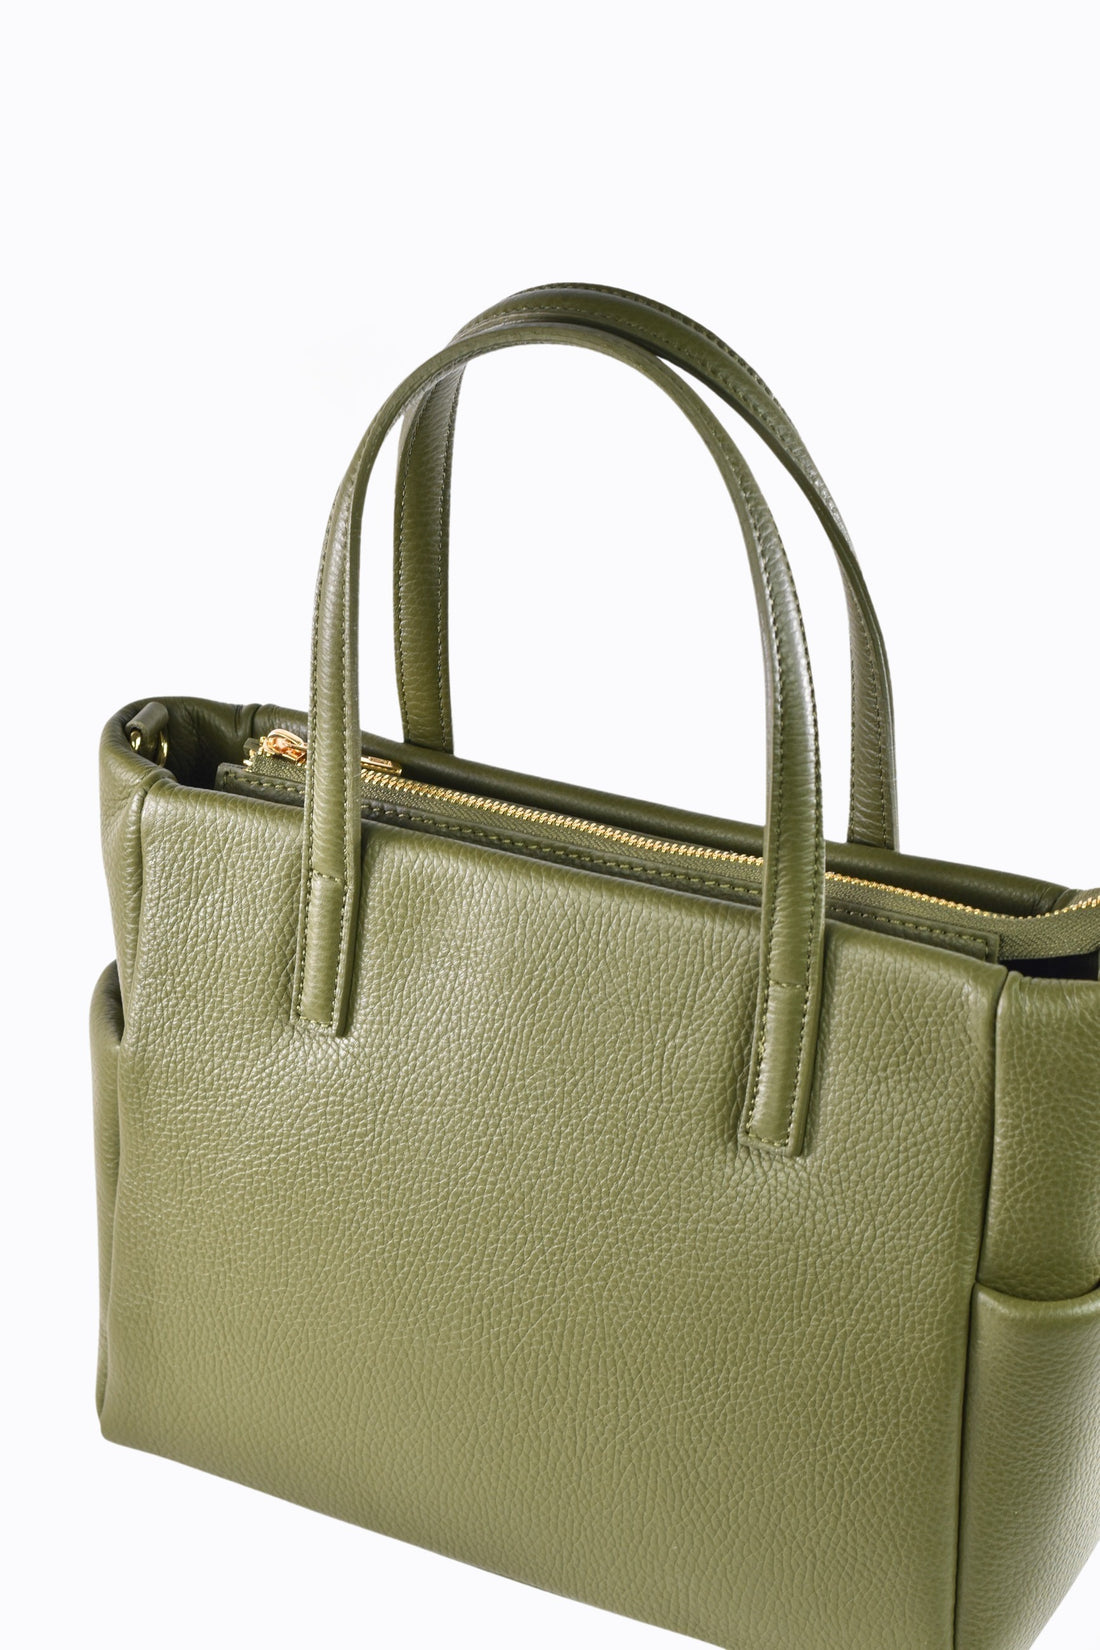 Diana bag in Dollar leather Olive green